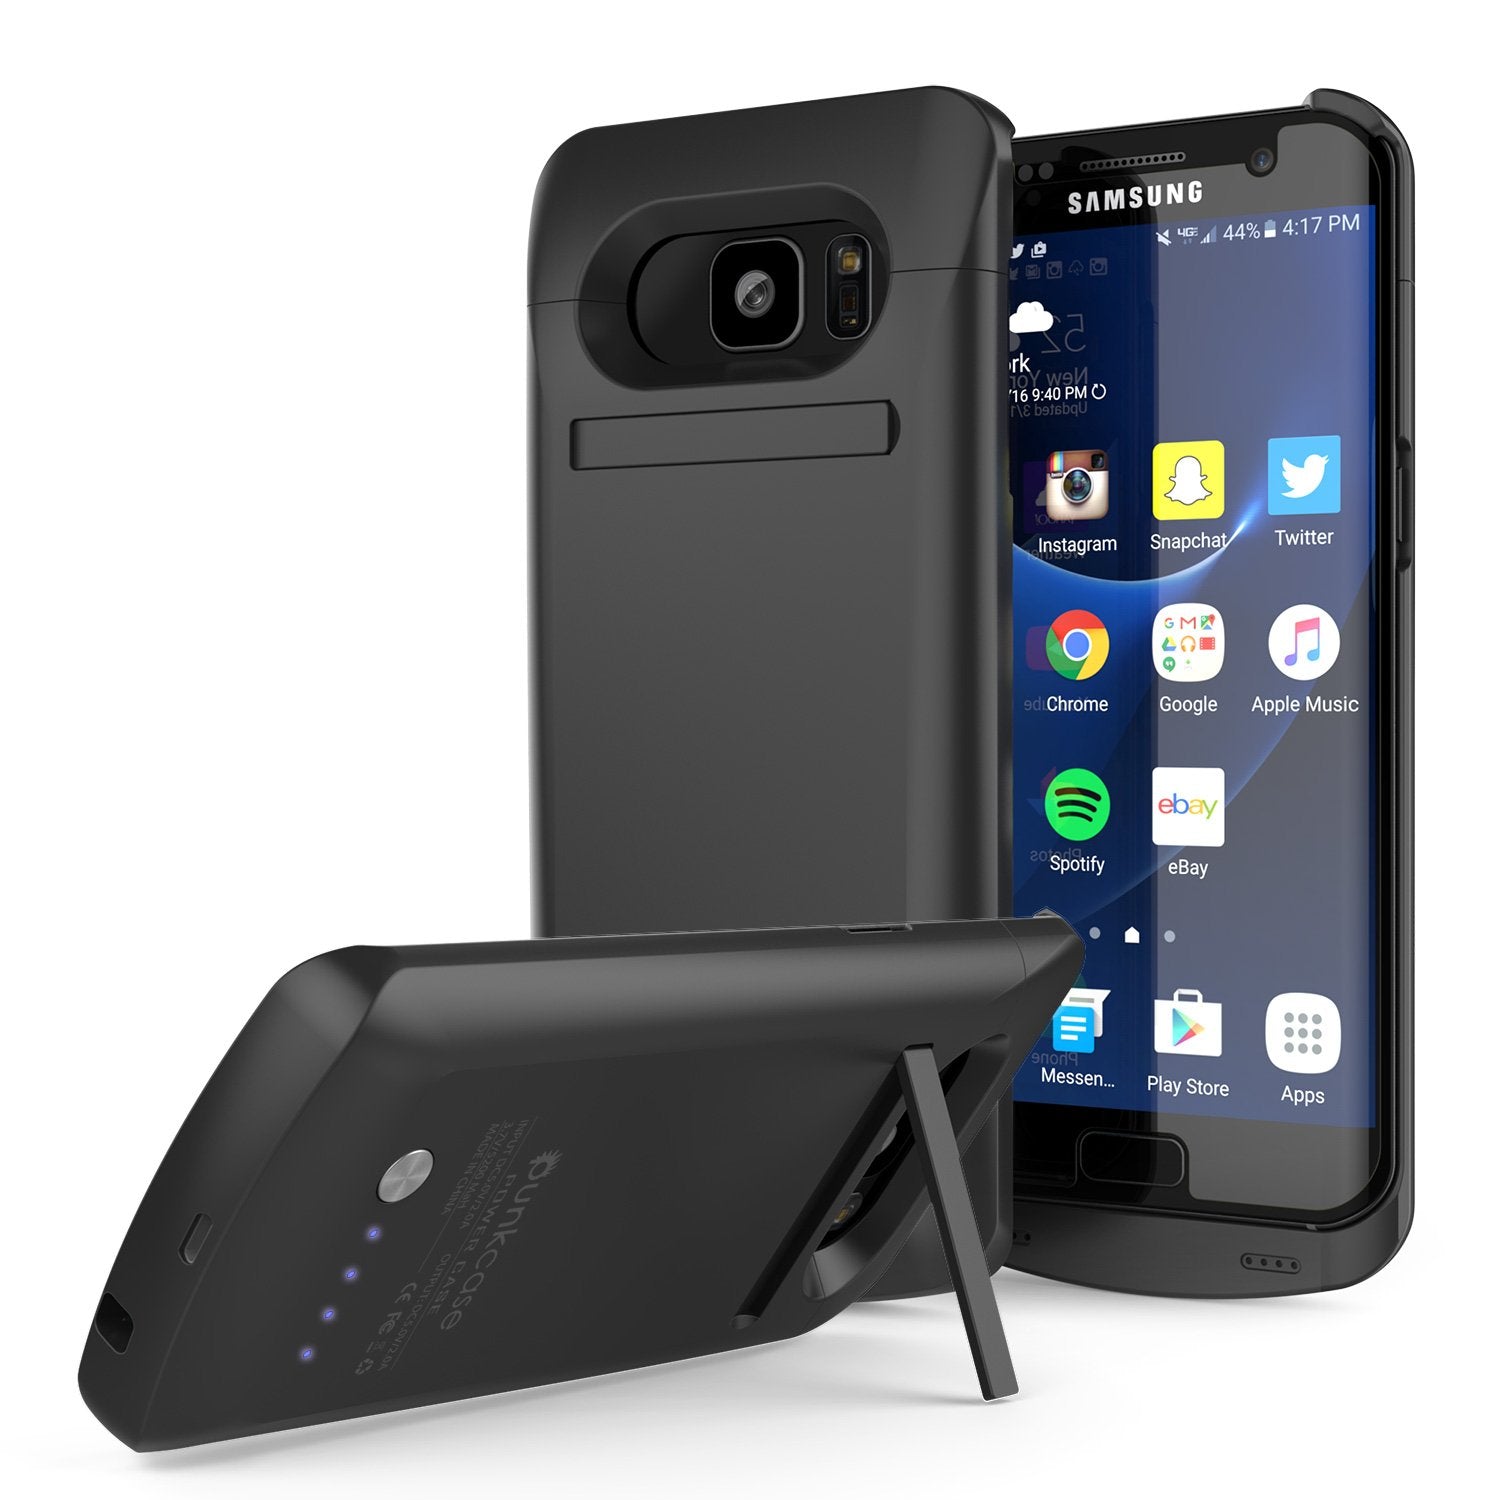 Galaxy S7 EDGE Battery Case, Punkcase 5200mAH Charger Case W/ Screen Protector | Integrated Kickstand & USB Port | IntelSwitch [Black]